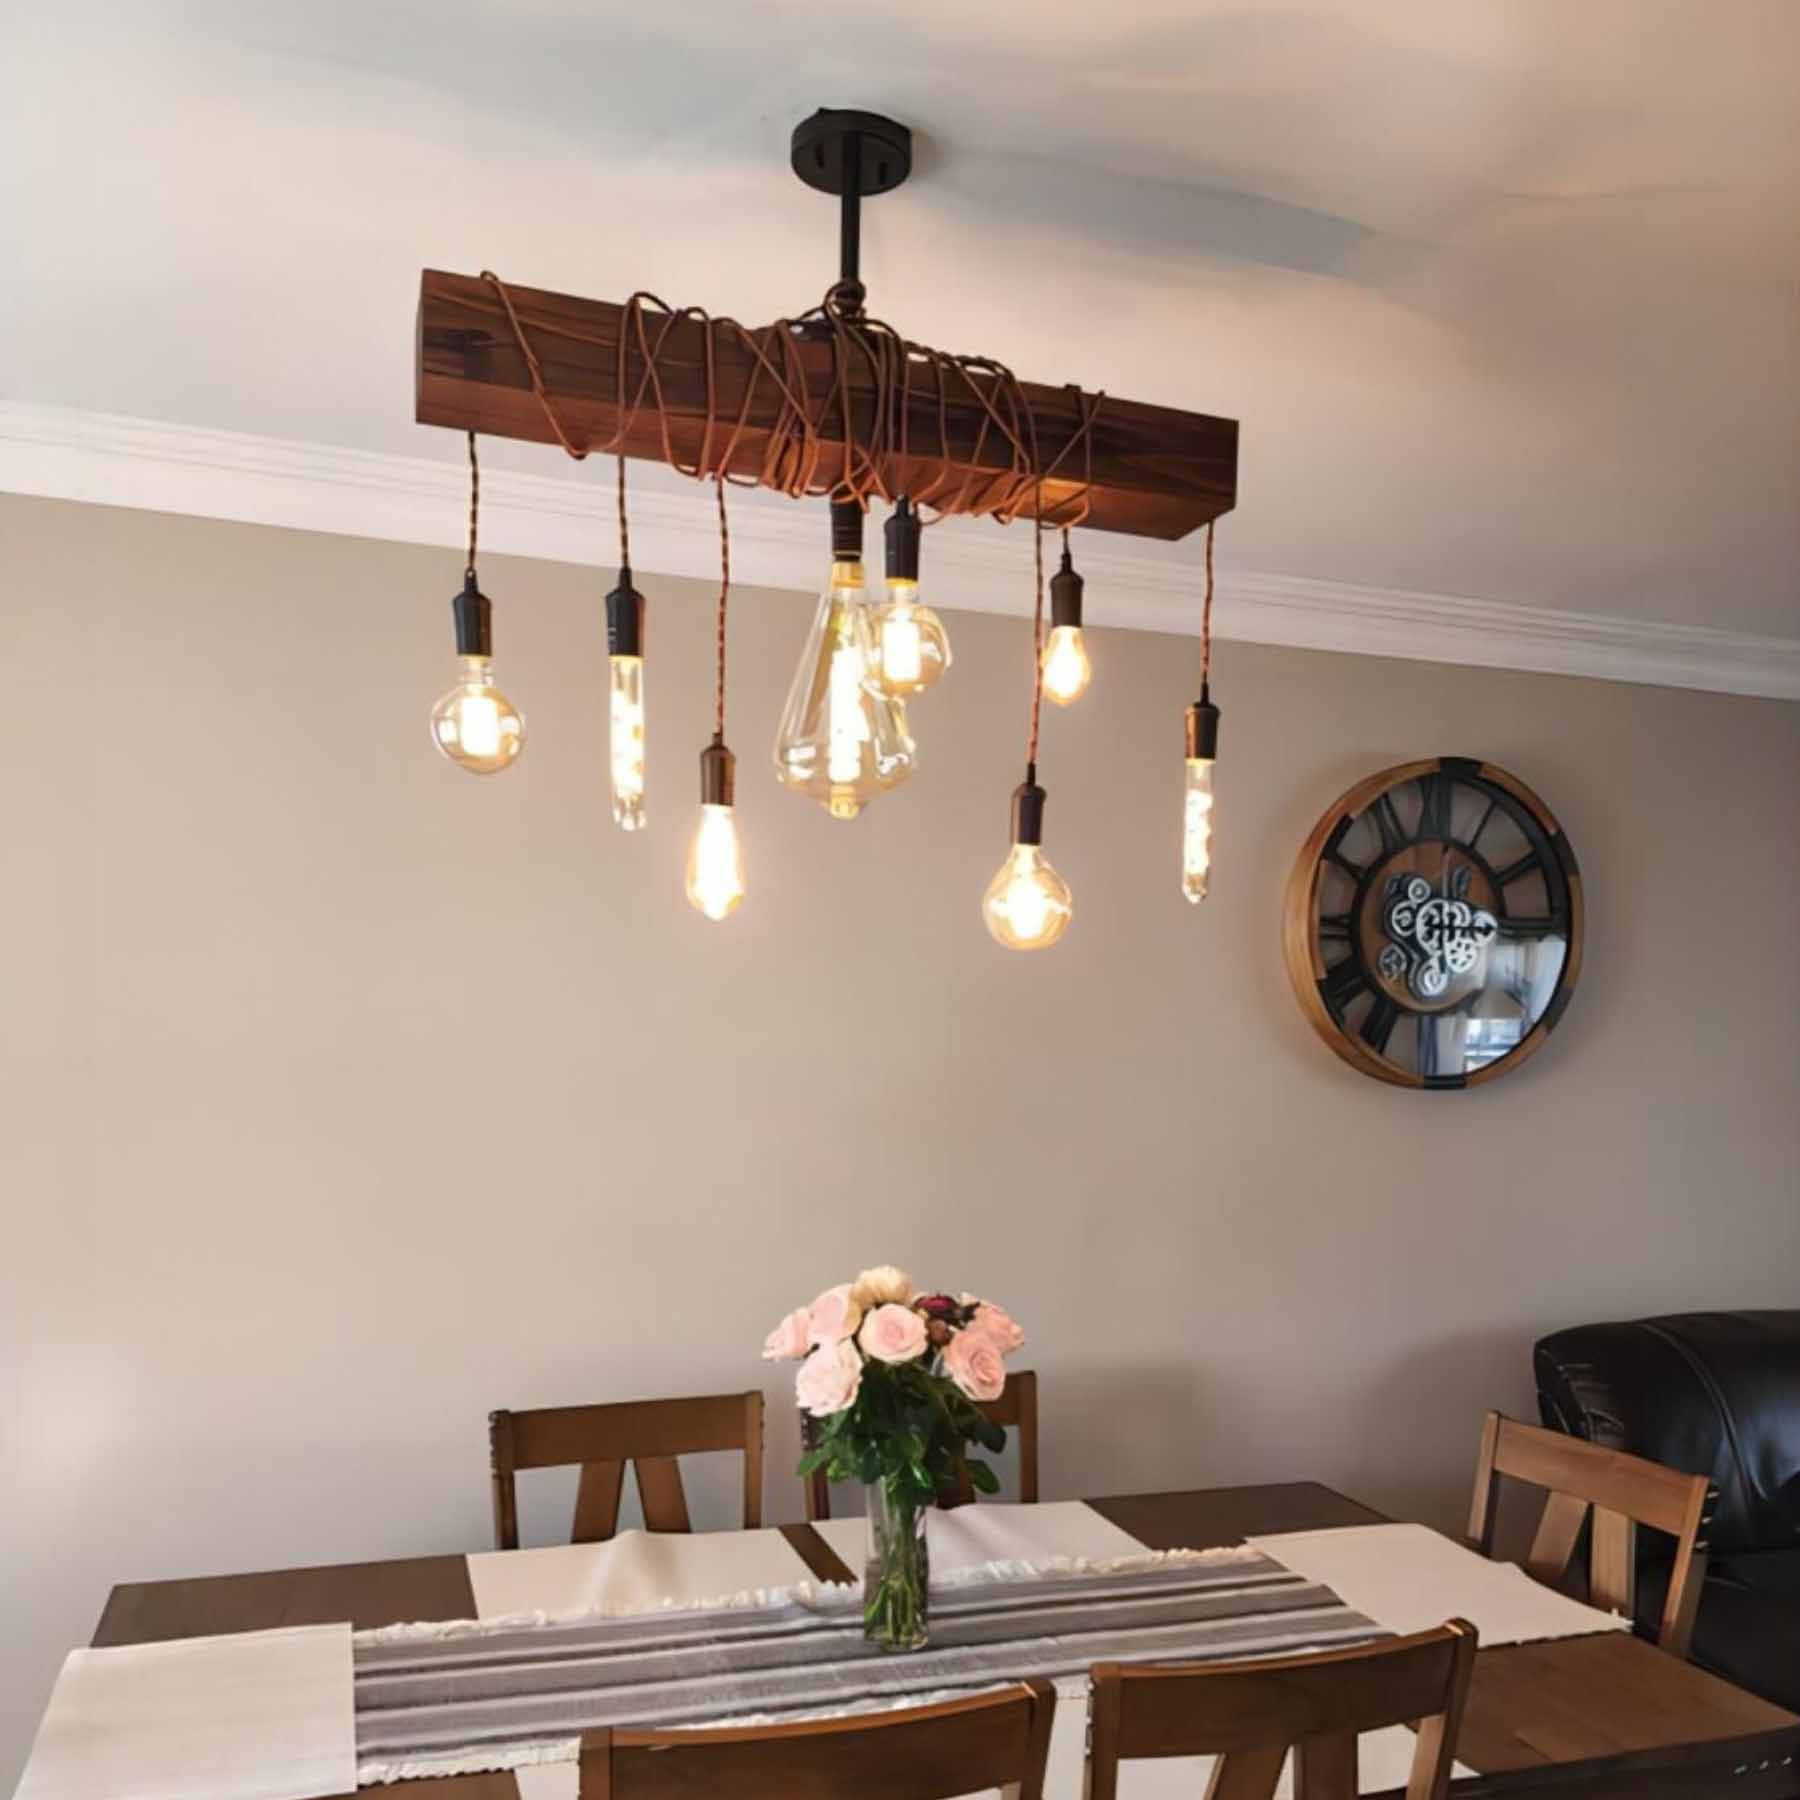 wooden chandeliers are an indispensable product in this design